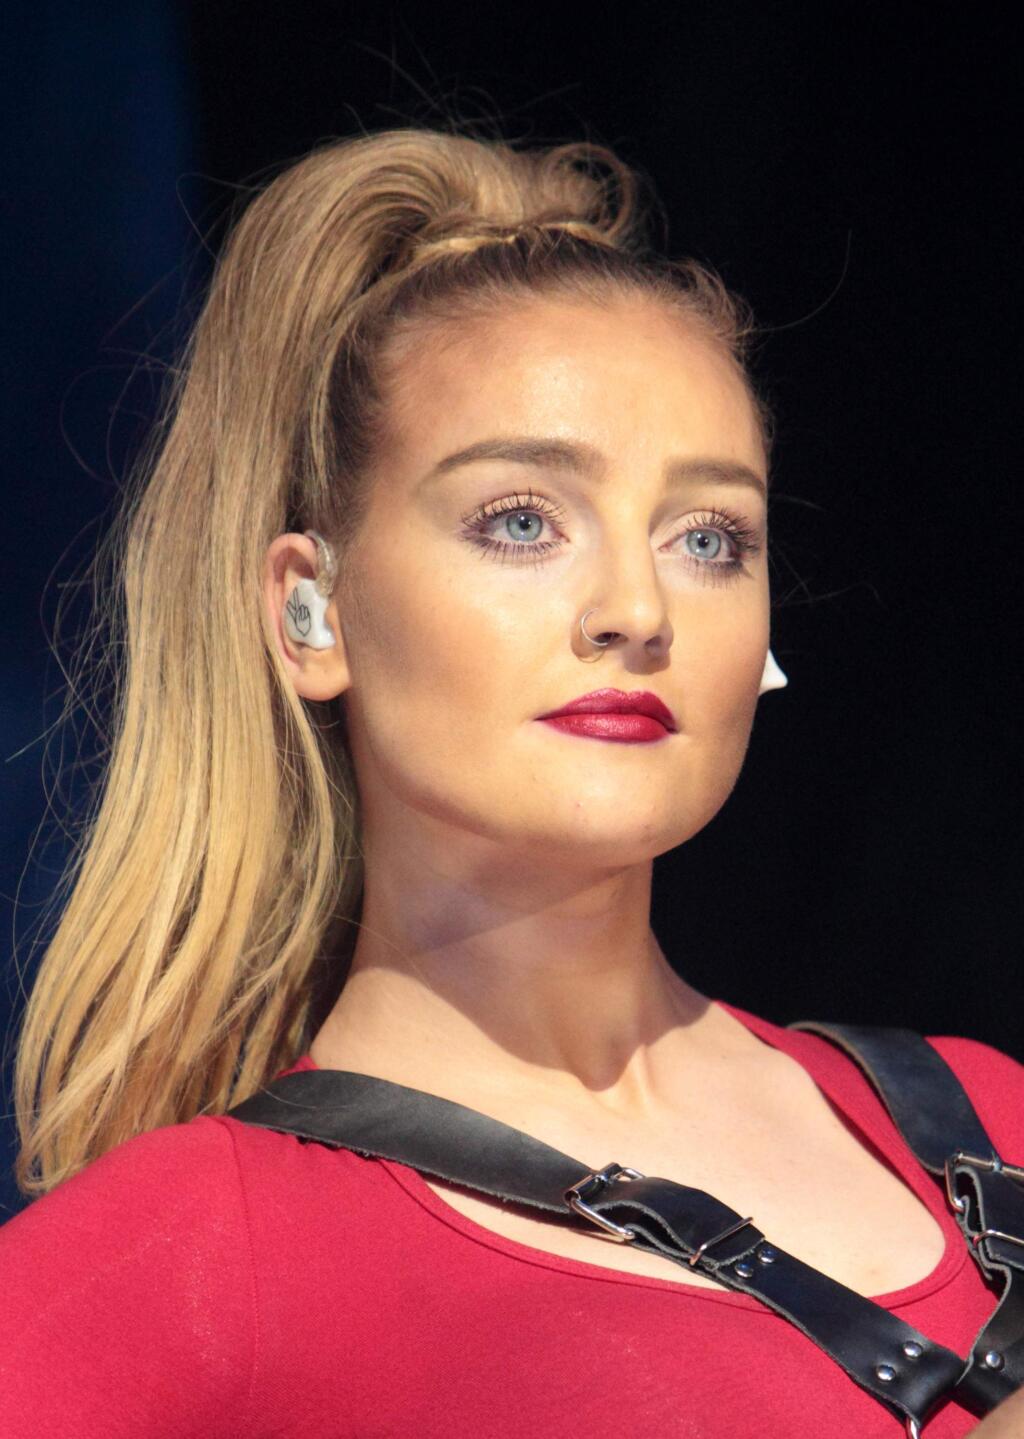 FILE - In this March 4, 2014 file photo, Perrie Edwards of the British pop music group Little Mix performs in concert in Bethlehem, Pa. Former One Direction member Zayn Malik and Edwards have called off their engagement.A representative for Malik on Tuesday, Aug. 4, 2015, confirmed that the couple ended their engagement. No more details were provided. (Photo by Owen Sweeney/Invision/AP, File)